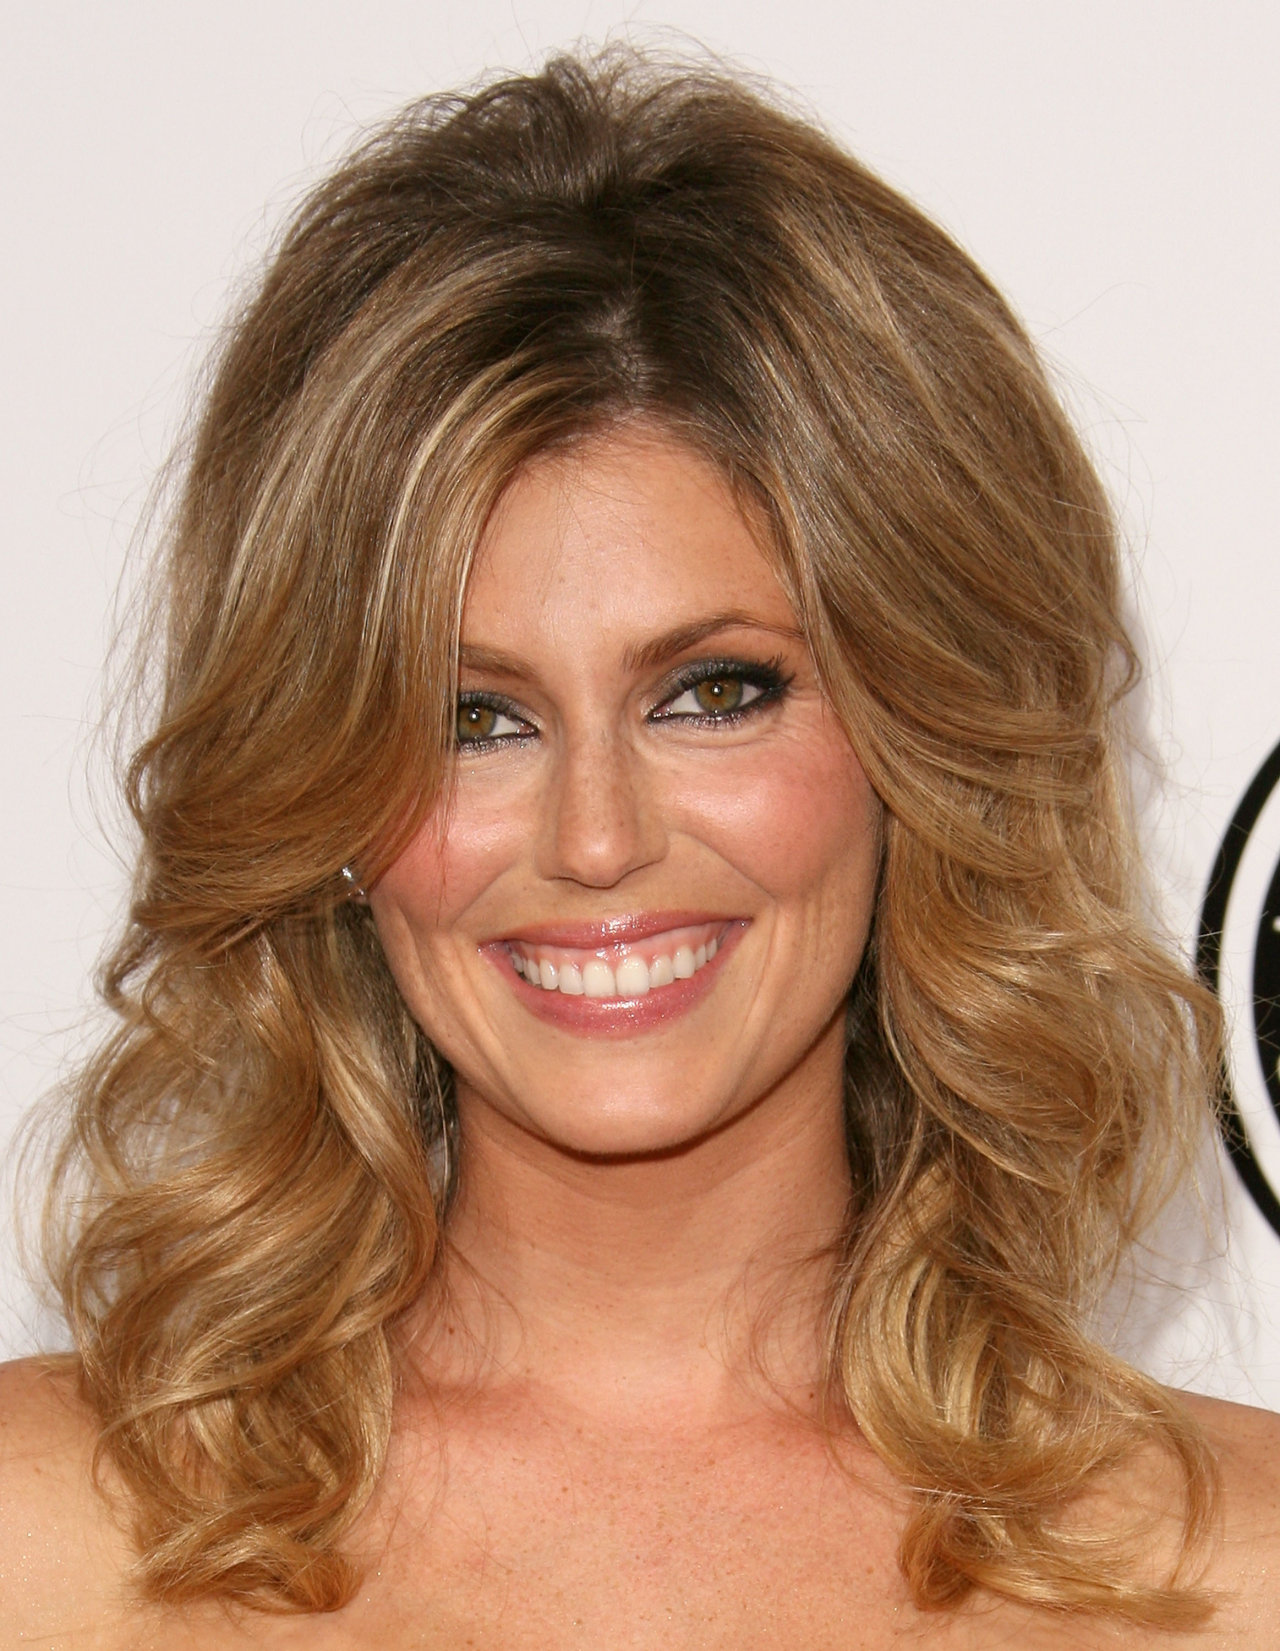 Diora Baird leaked wallpapers